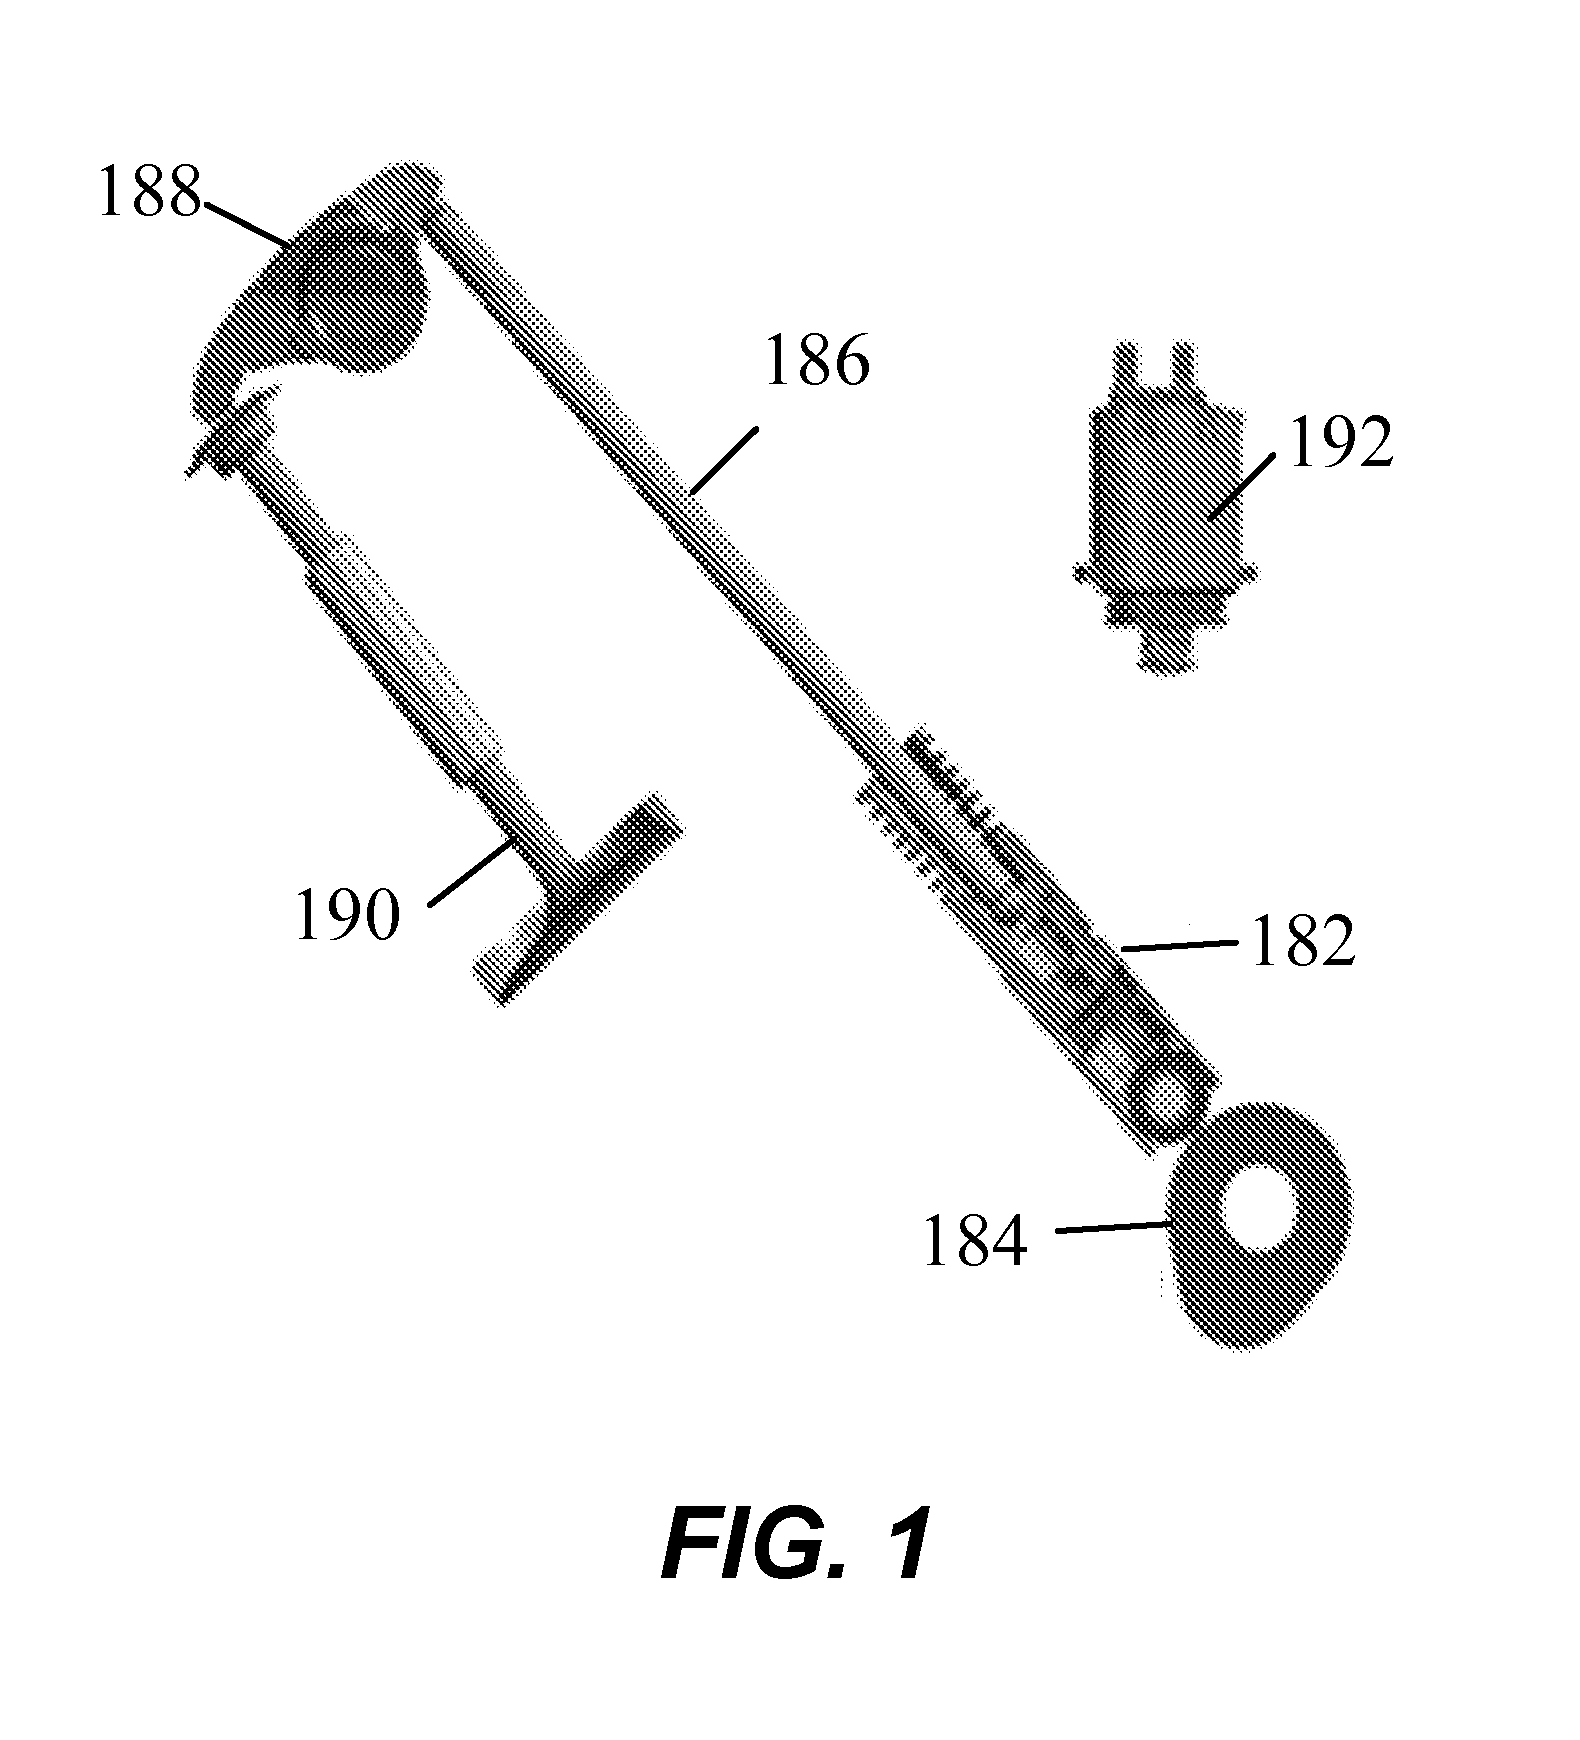 Internal combustion engine using variable valve lift and skip fire control